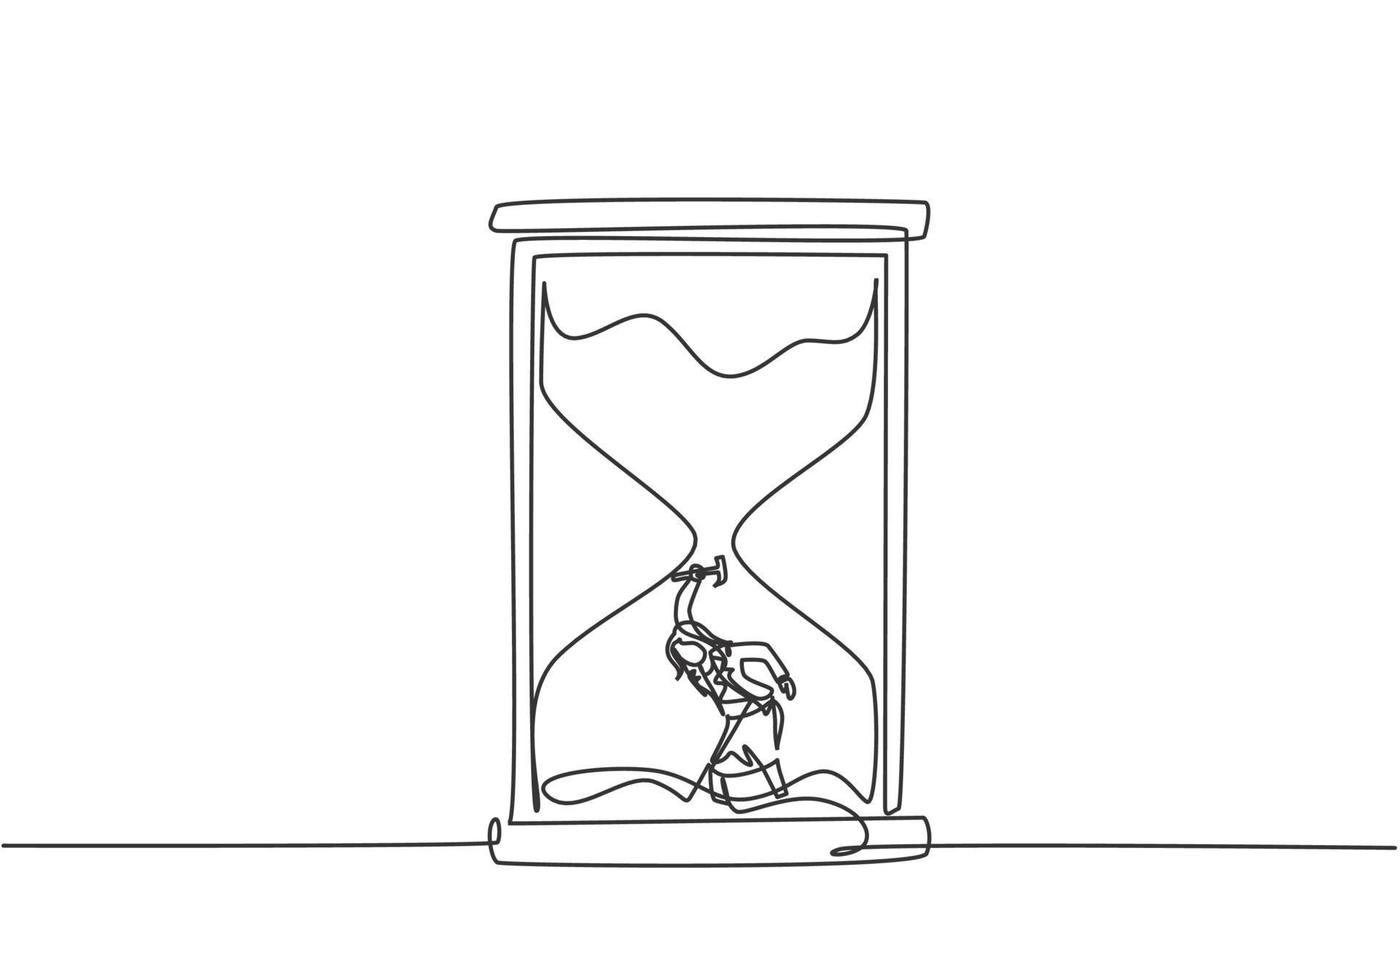 Continuous one line drawing young woman worker digging treasure inside hourglass. Getting a new business idea minimalist concept. Single line draw design vector graphic illustration.